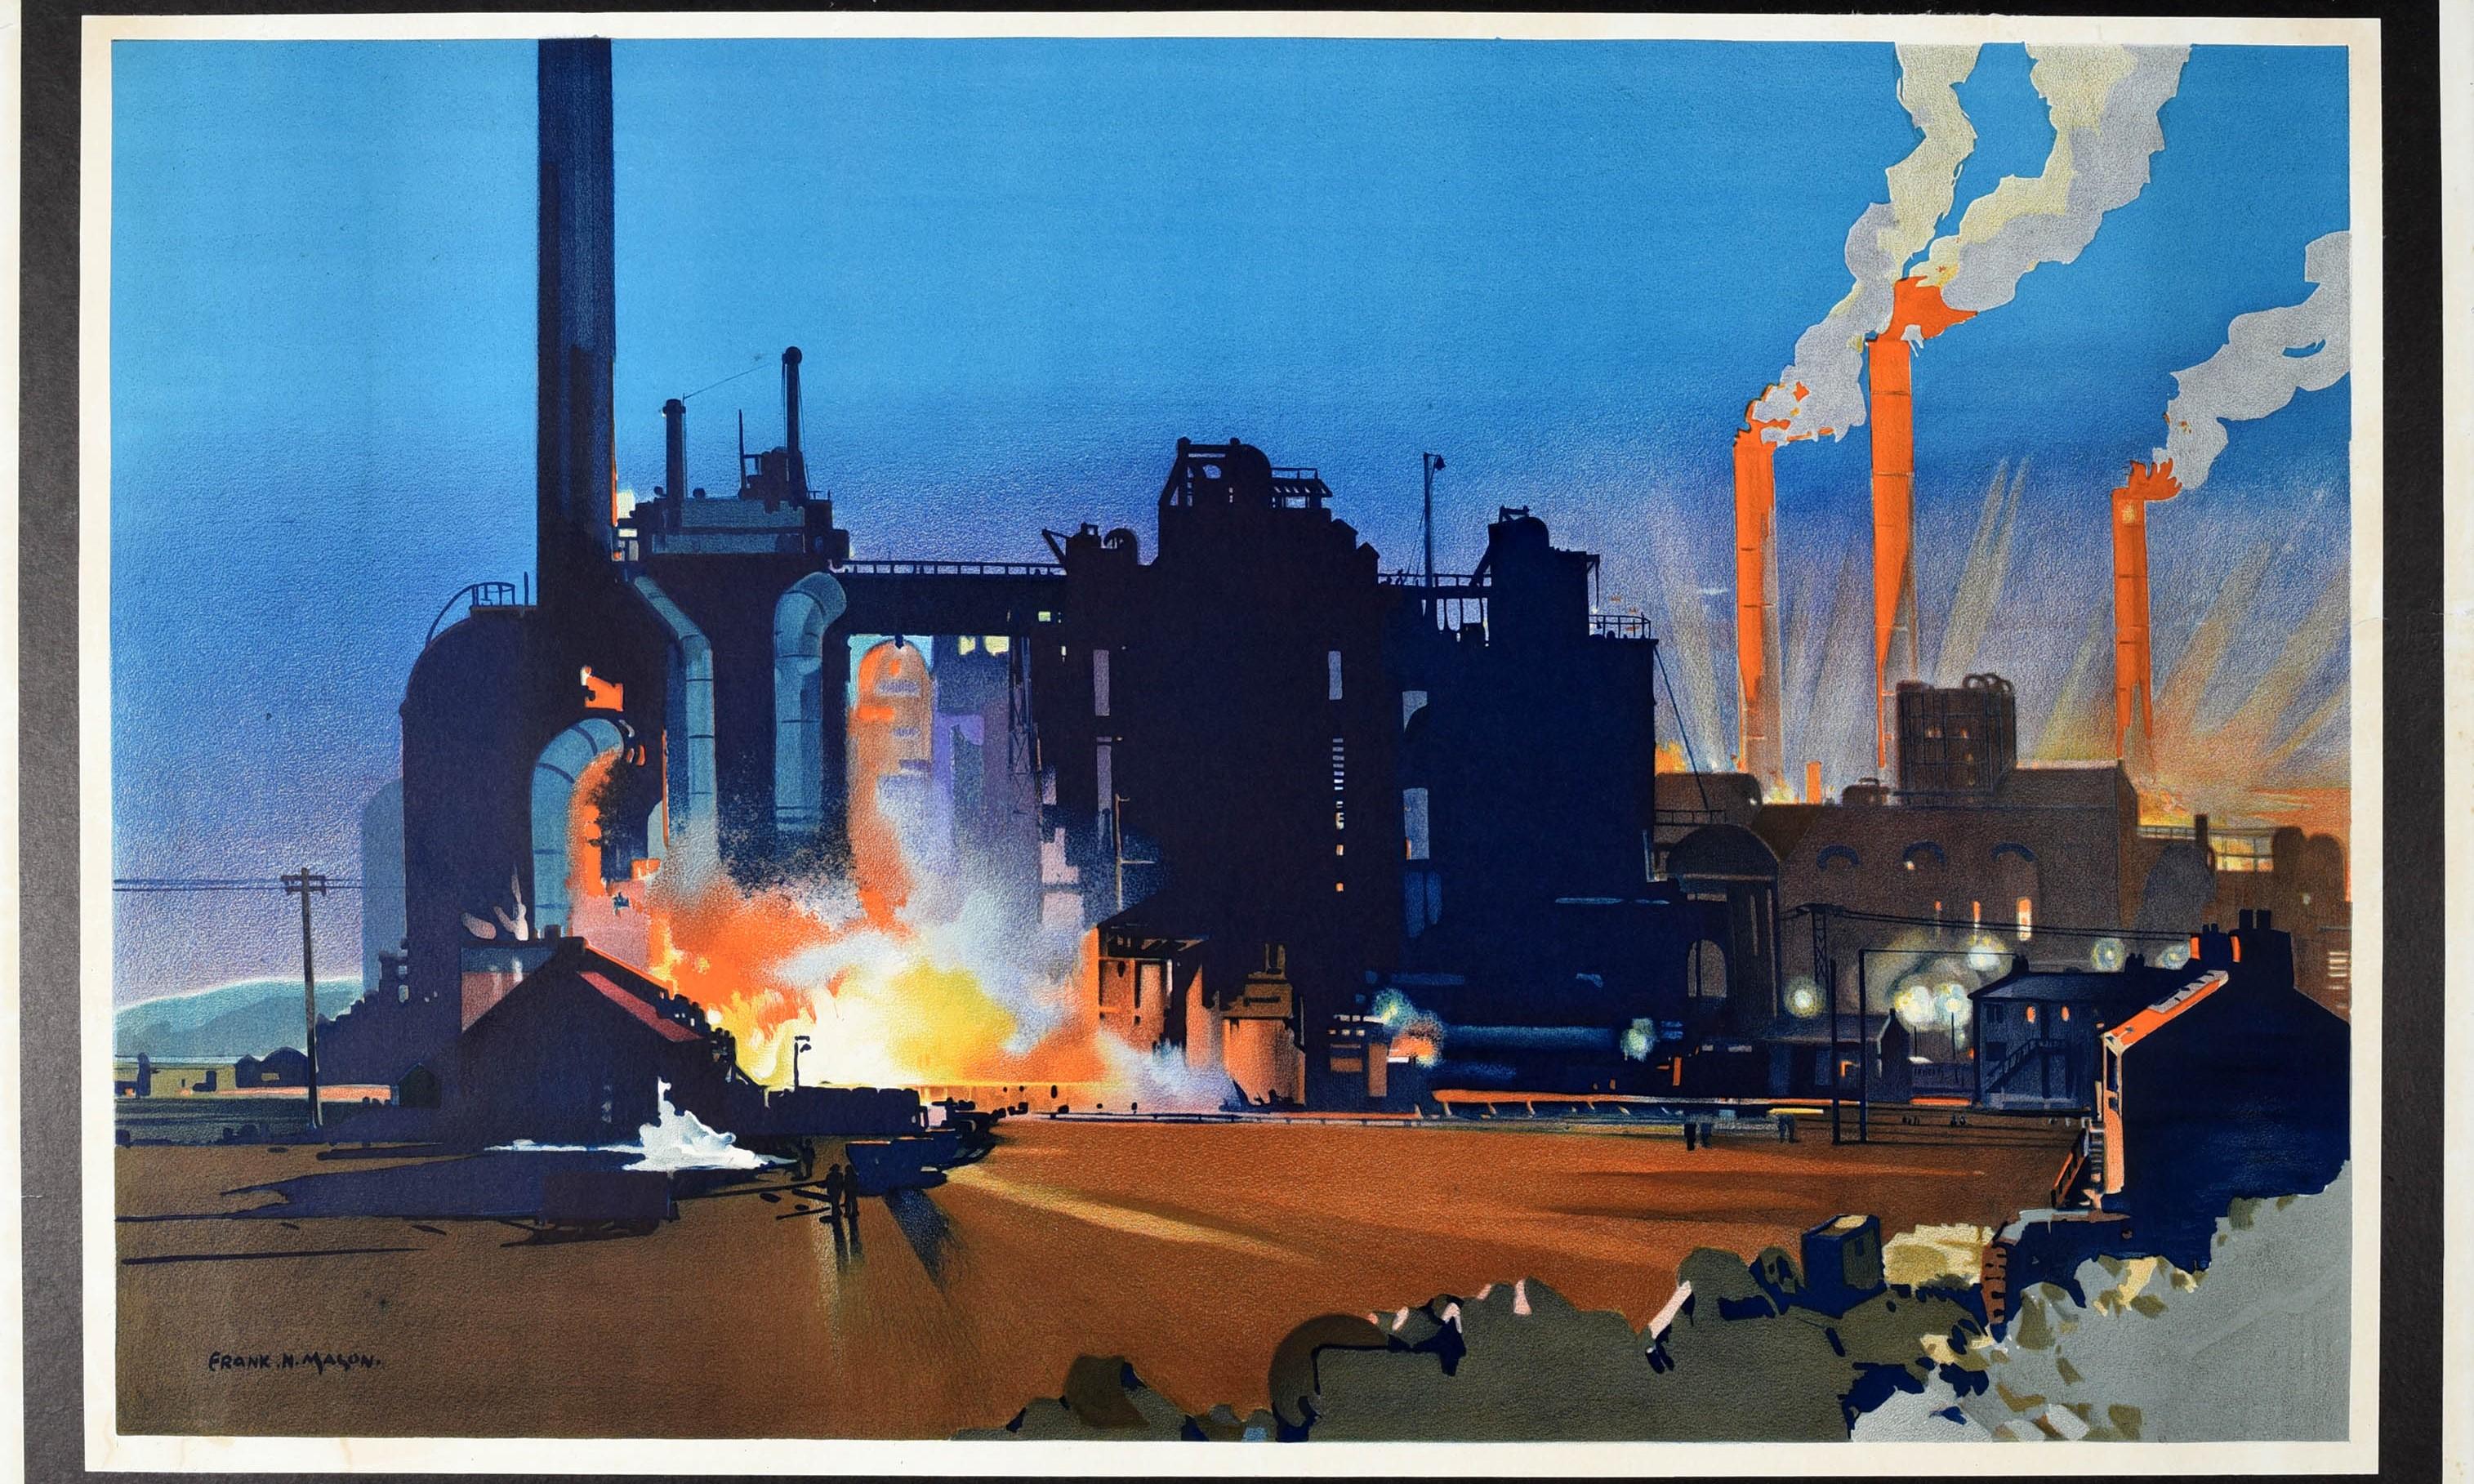 Original vintage travel poster issued by the London North Eastern Railway - East Coast Industries served by the LNER A Blast Furnace on the LNER - featuring a dynamic industrial design depicting a factory lit up by a dramatic blast in white, yellow